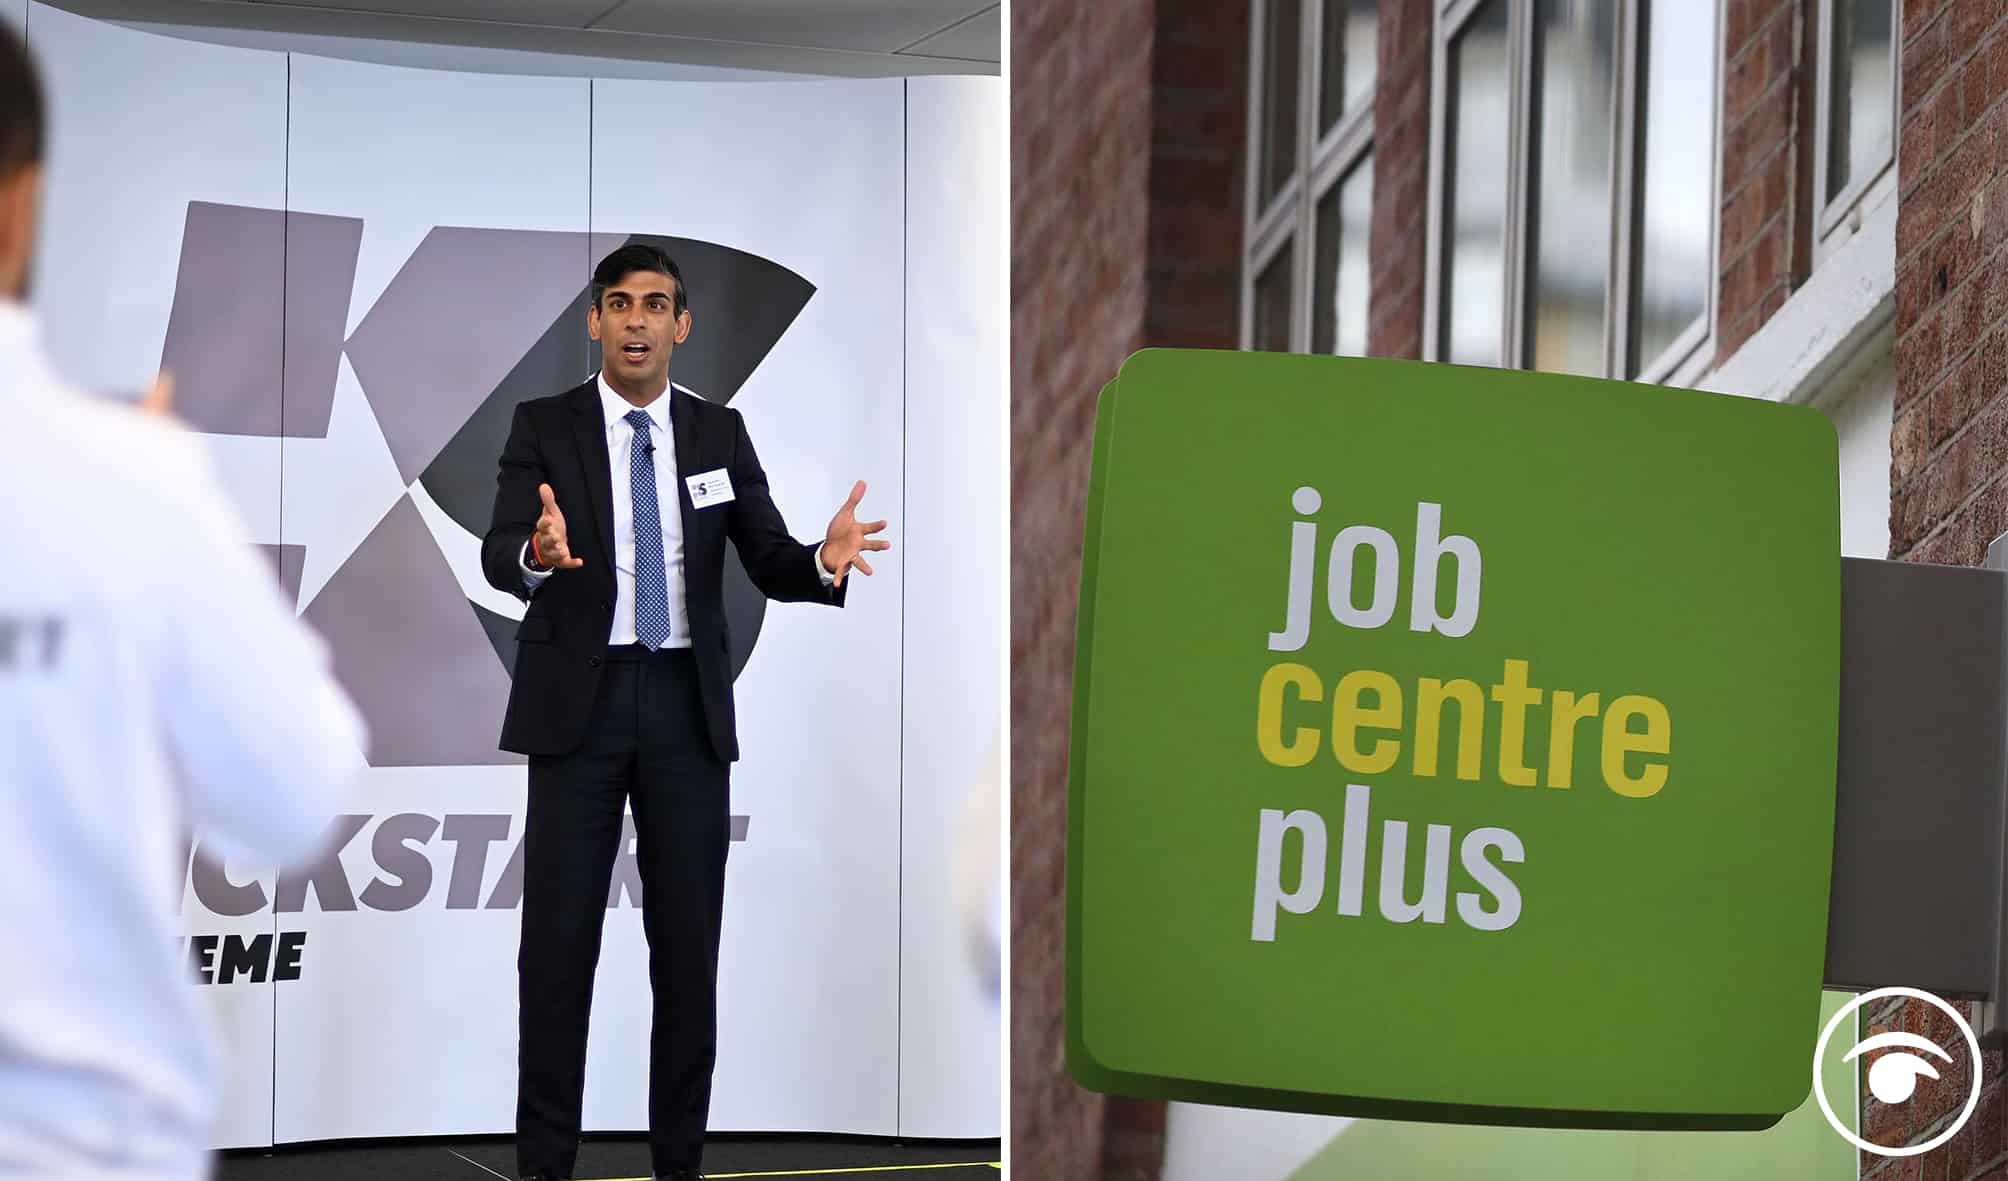 ‘Huge success’ Tory Minister claims as fewer than 2,000 young people start roles via £2bn job scheme